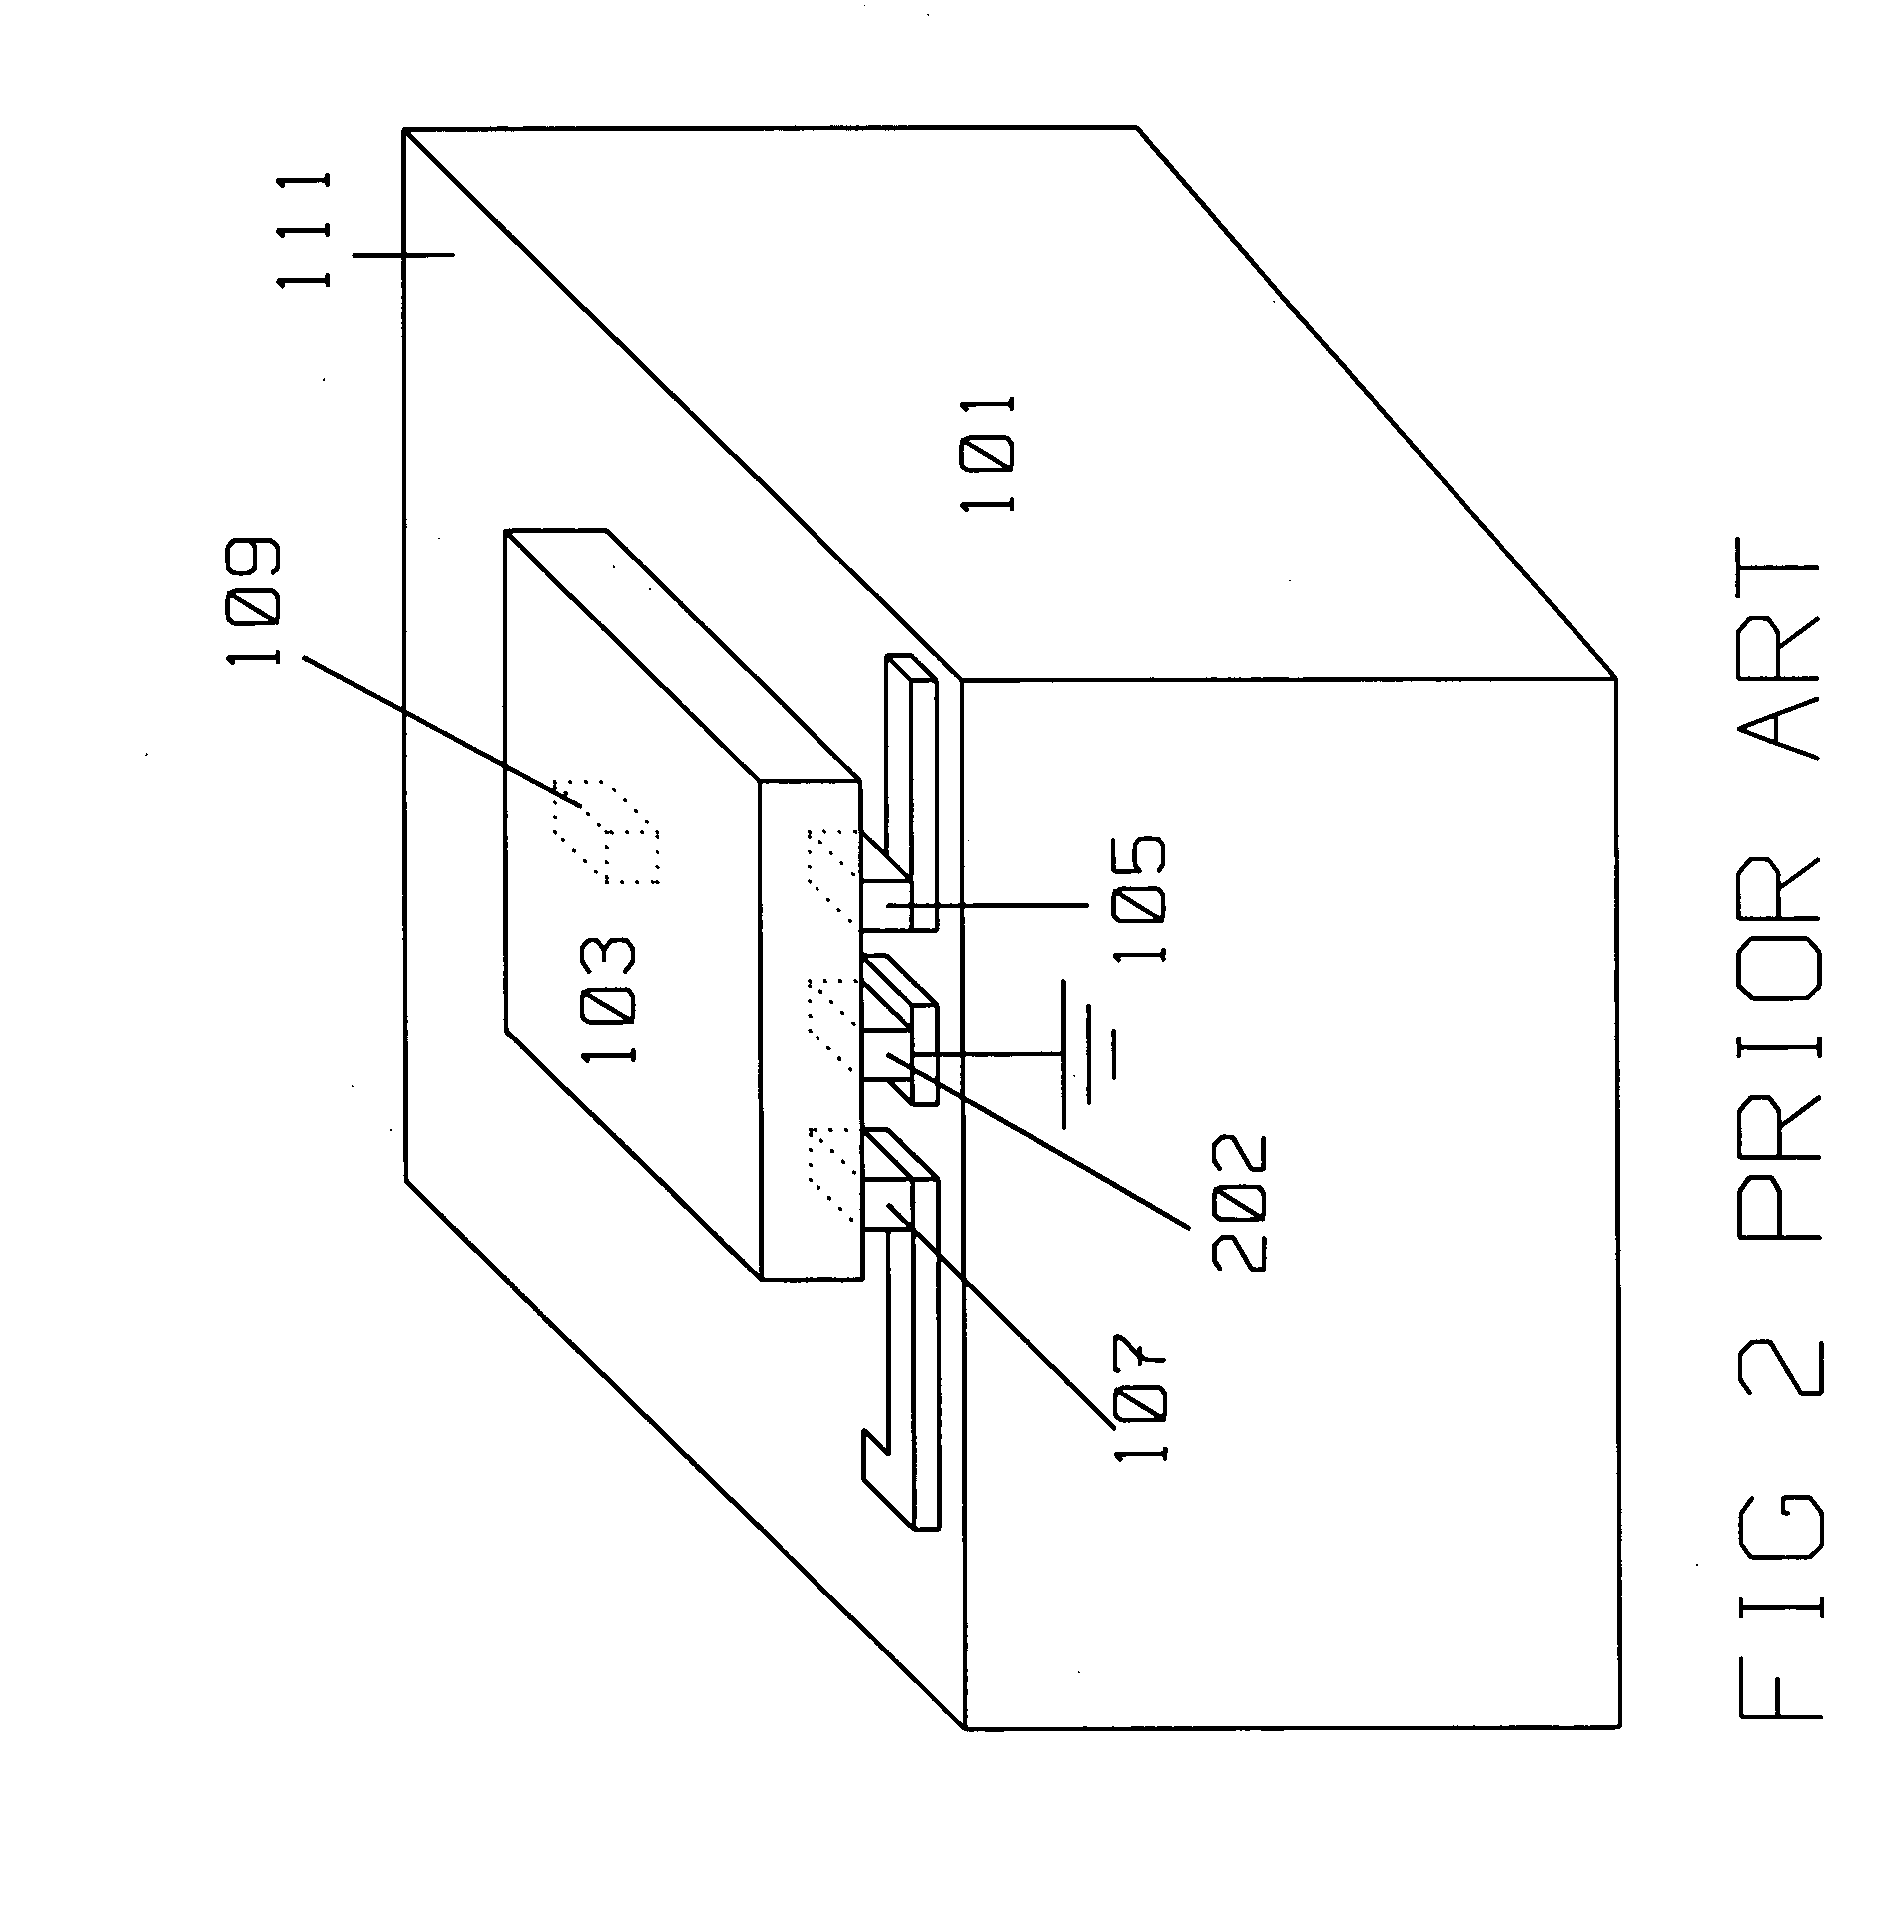 Periodic interleaved star with vias electromagnetic bandgap structure for microstrip and flip chip on board applications